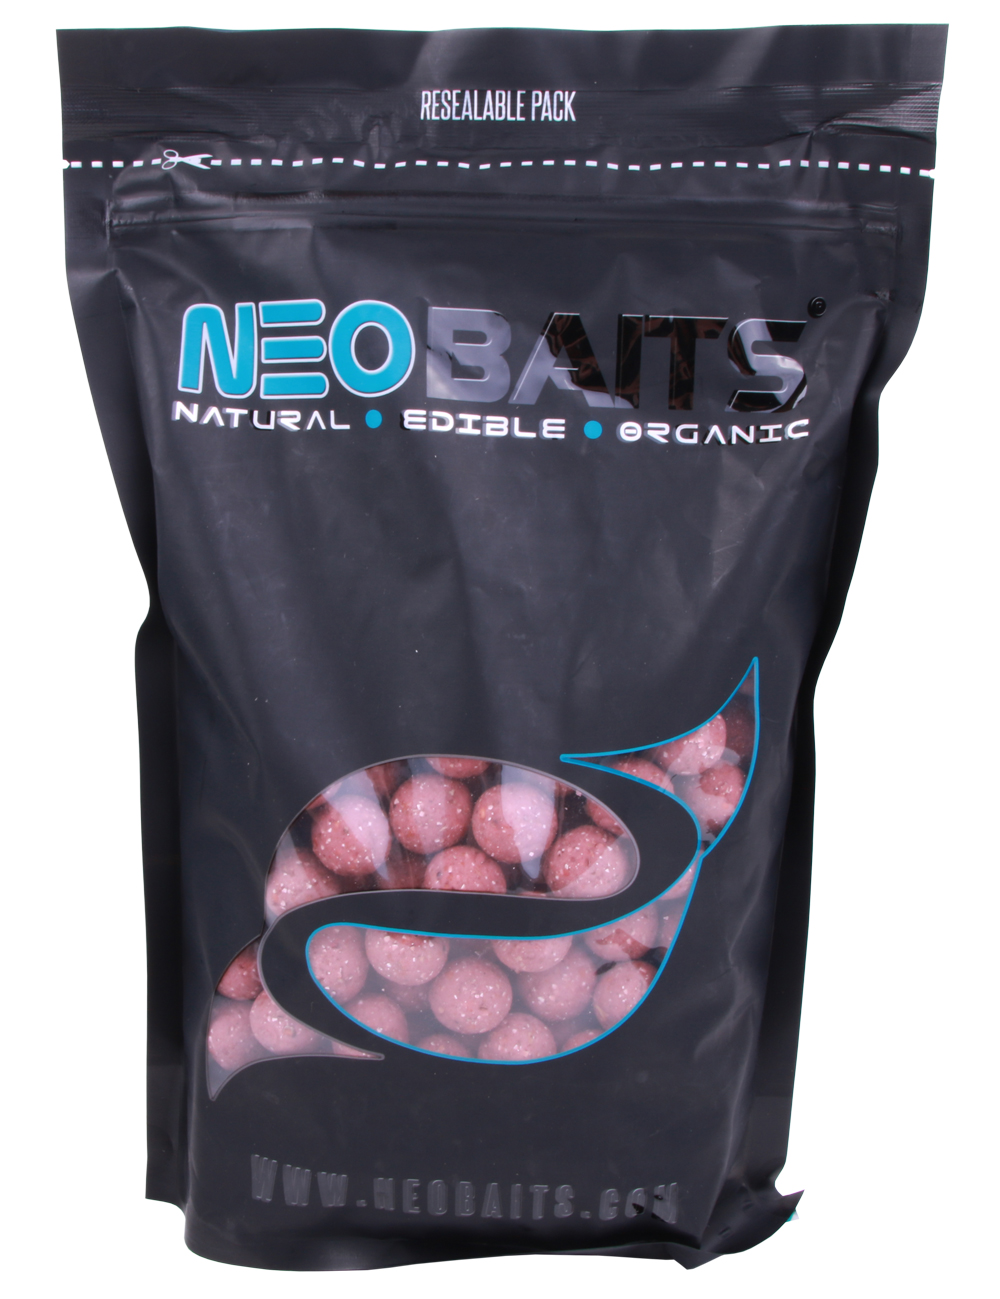 Neo-Baits Readymades 1kg - Spicy Fish